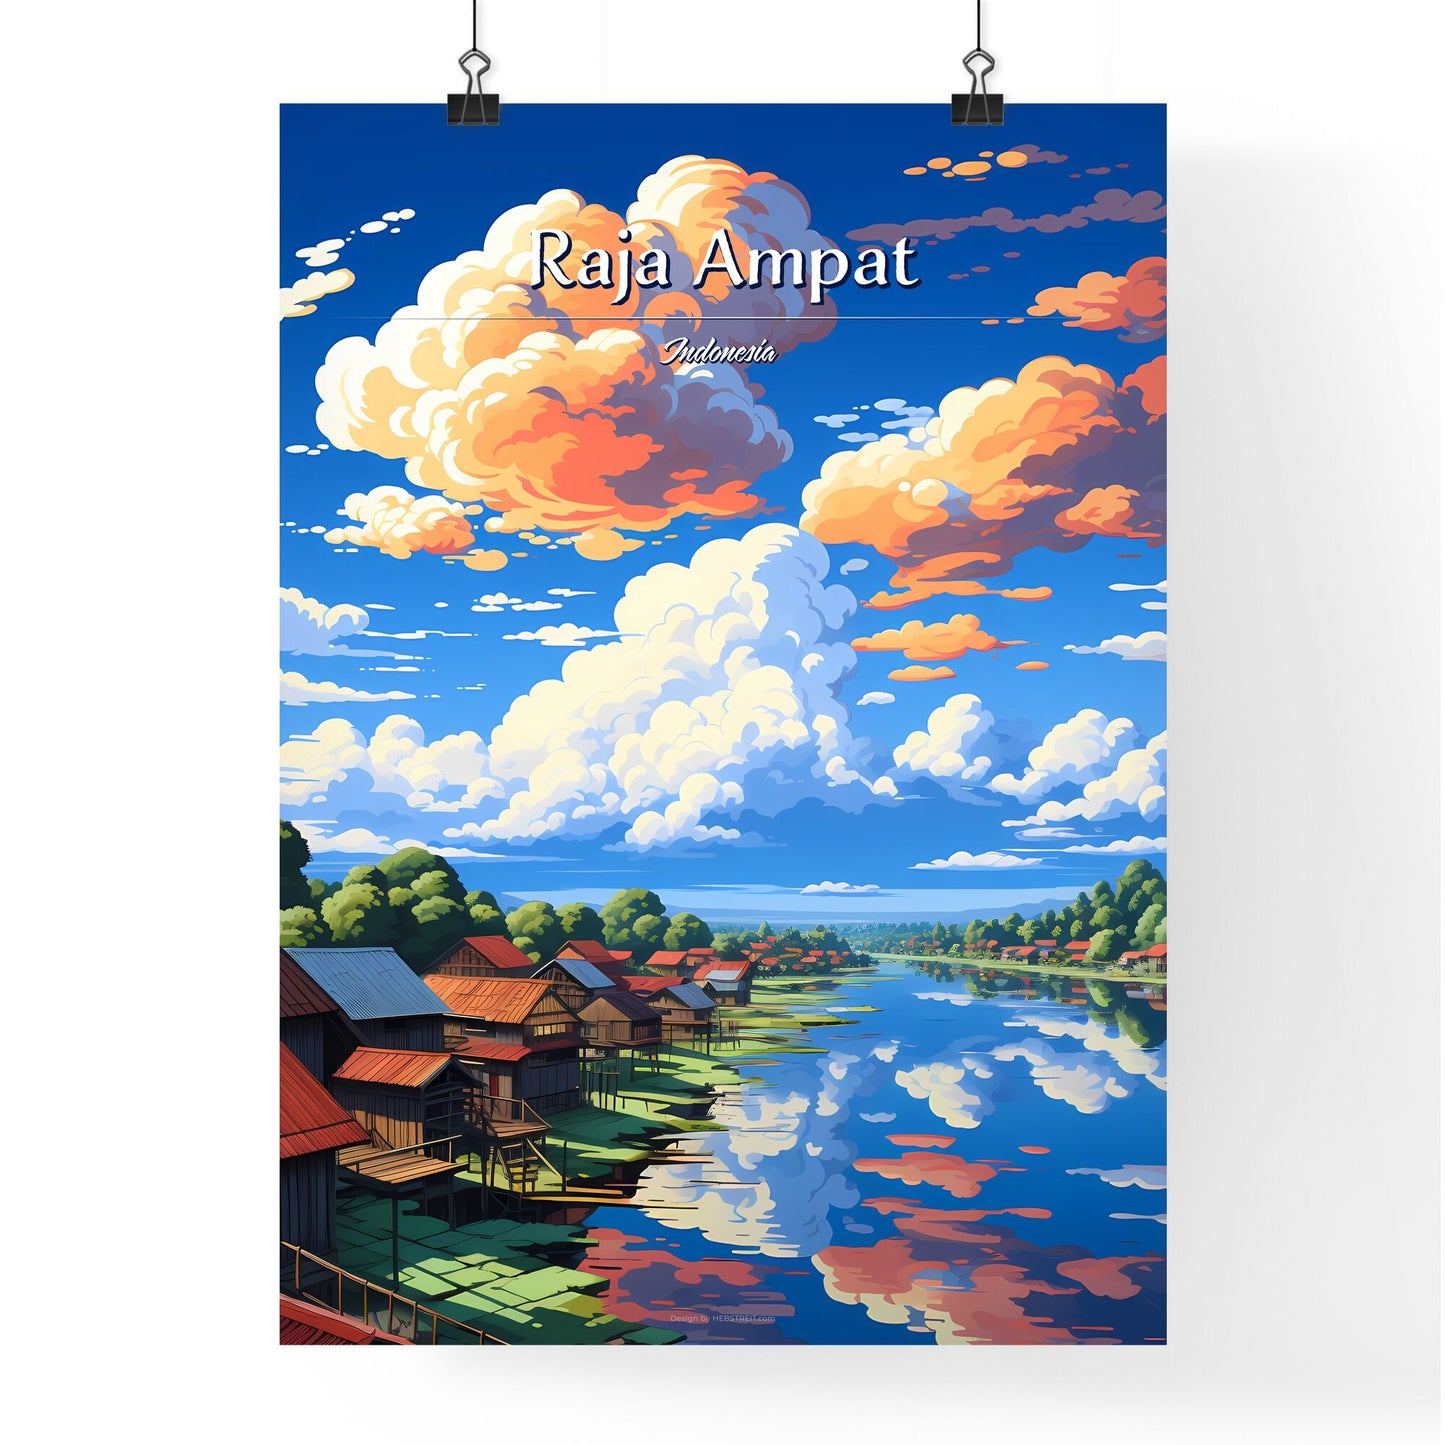 On the roofs of Raja Ampat, Indonesia - Art print of a group of houses on stilts by a river Default Title